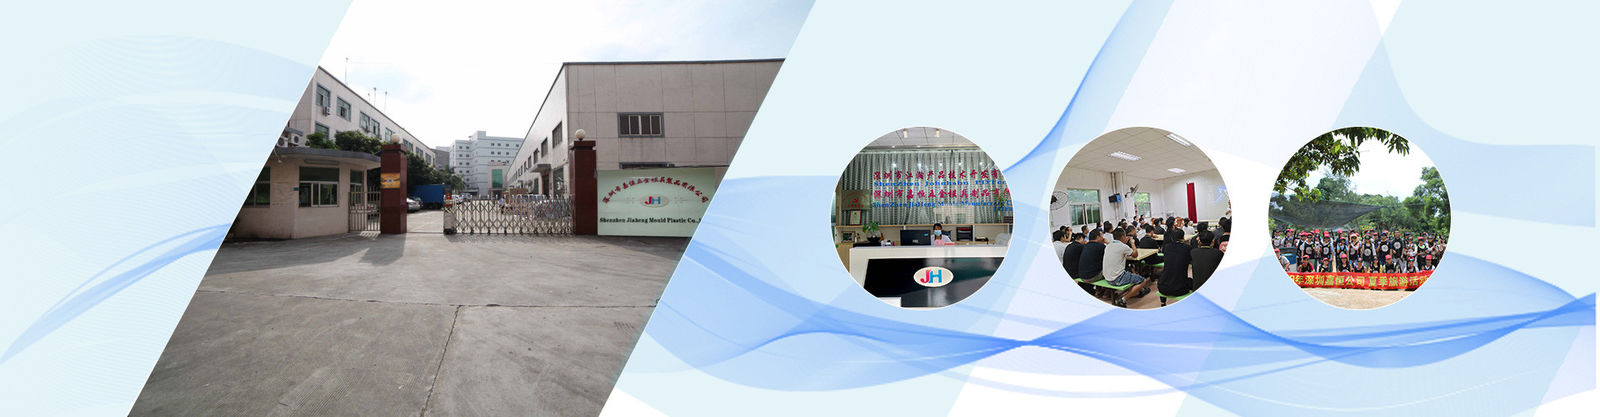 quality Mold Die Casting factory